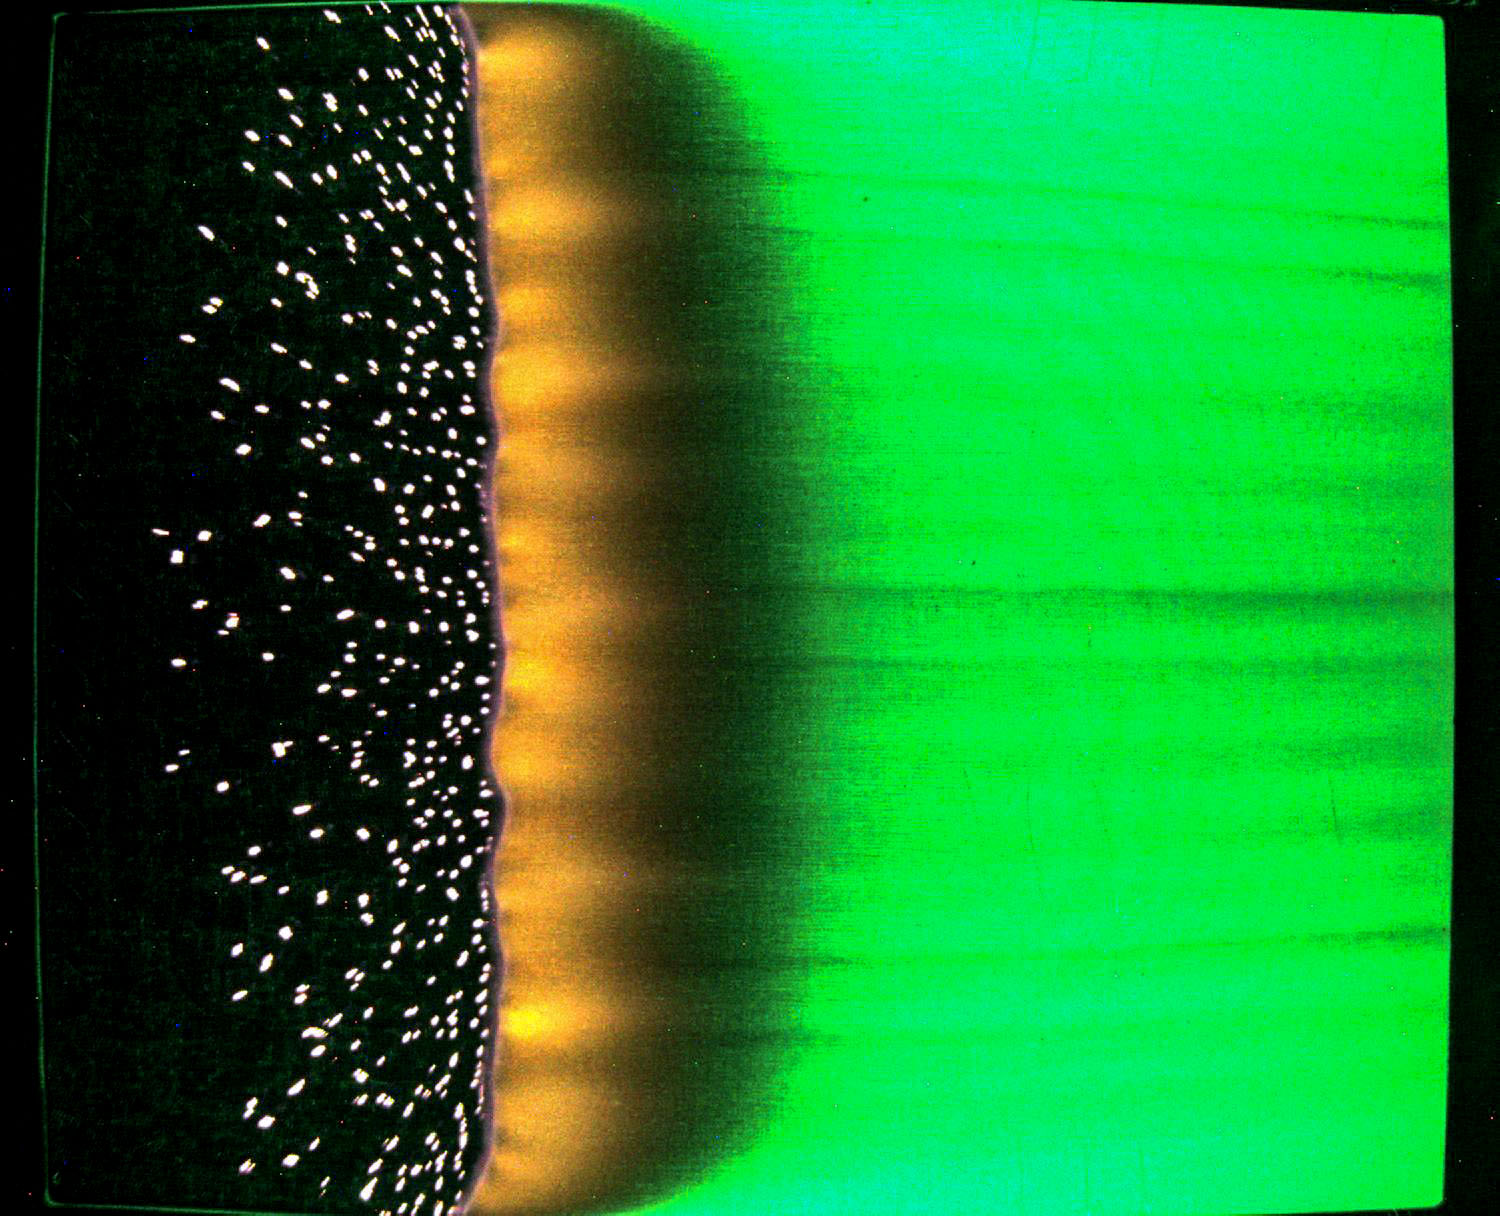 From left to right, this image has a band of black from top to bottom, a scattering of bright white specks of smoldering cotton like snowflakes, a band of orange flame, a small region of black where the cotton is beginning to char, and a wide band of unburned composite material that appears green because the sample is illuminated with green LED lights.